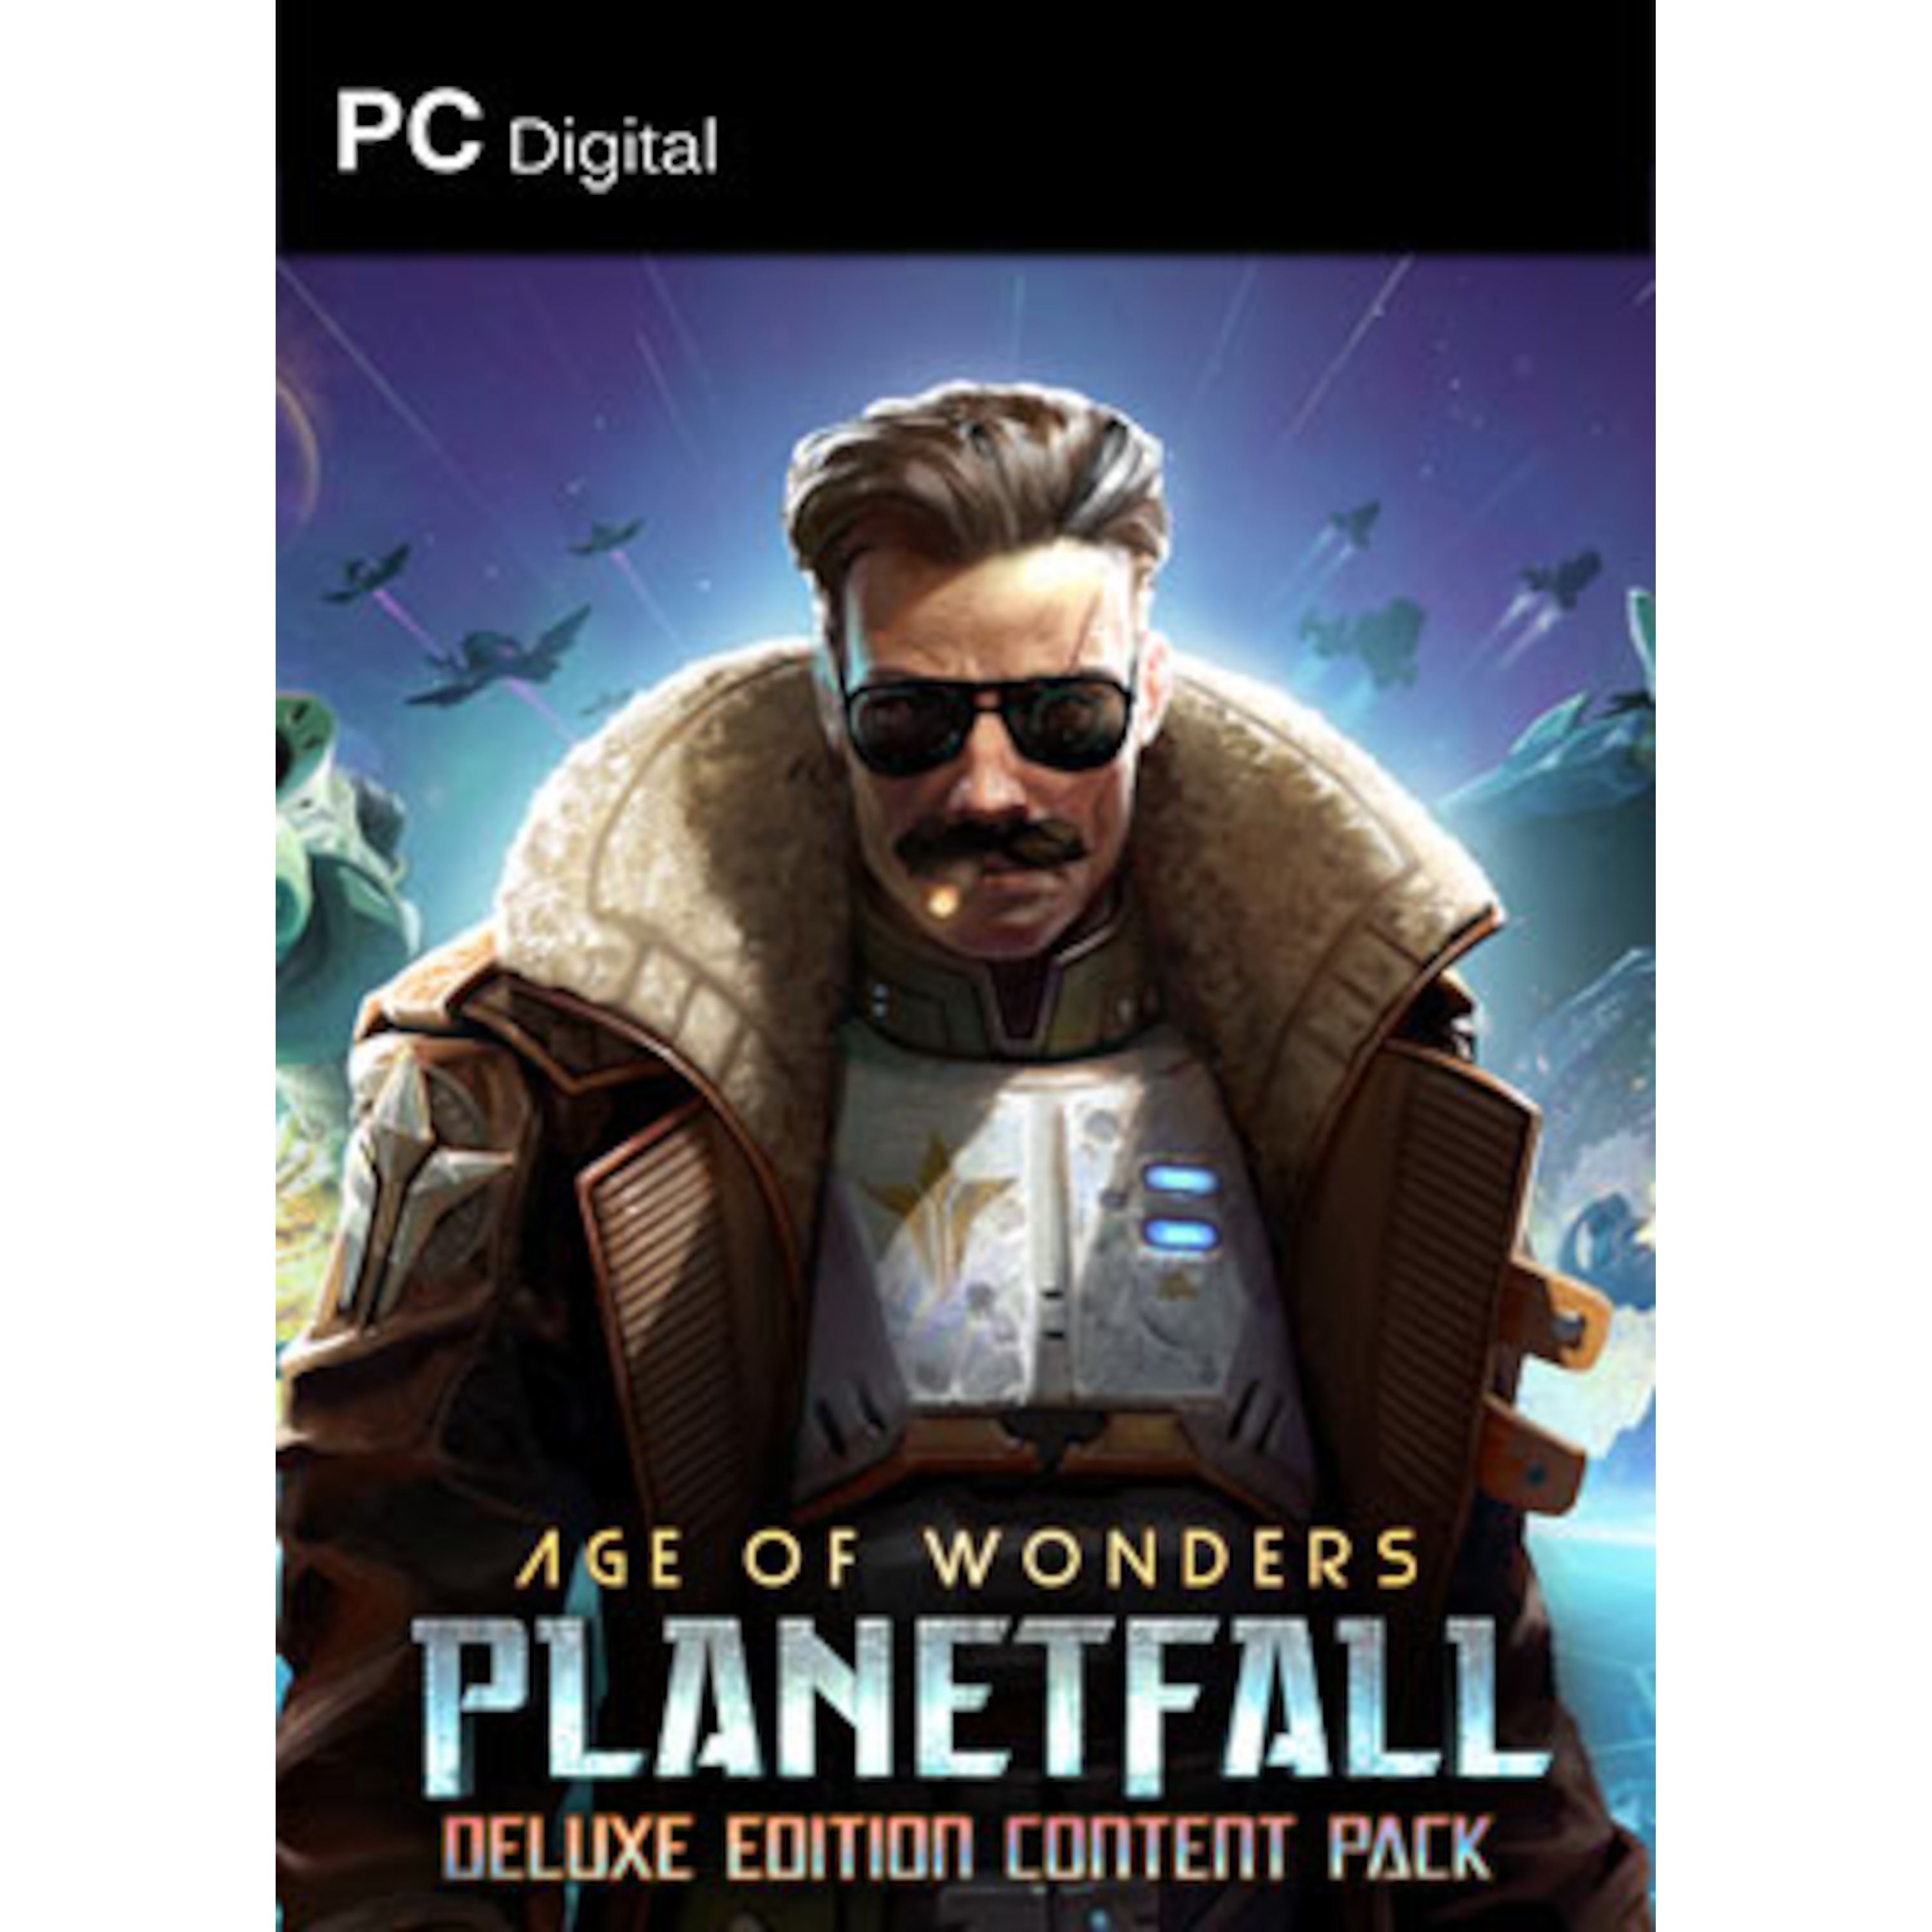 age of wonders planetfall deluxe edition content pack